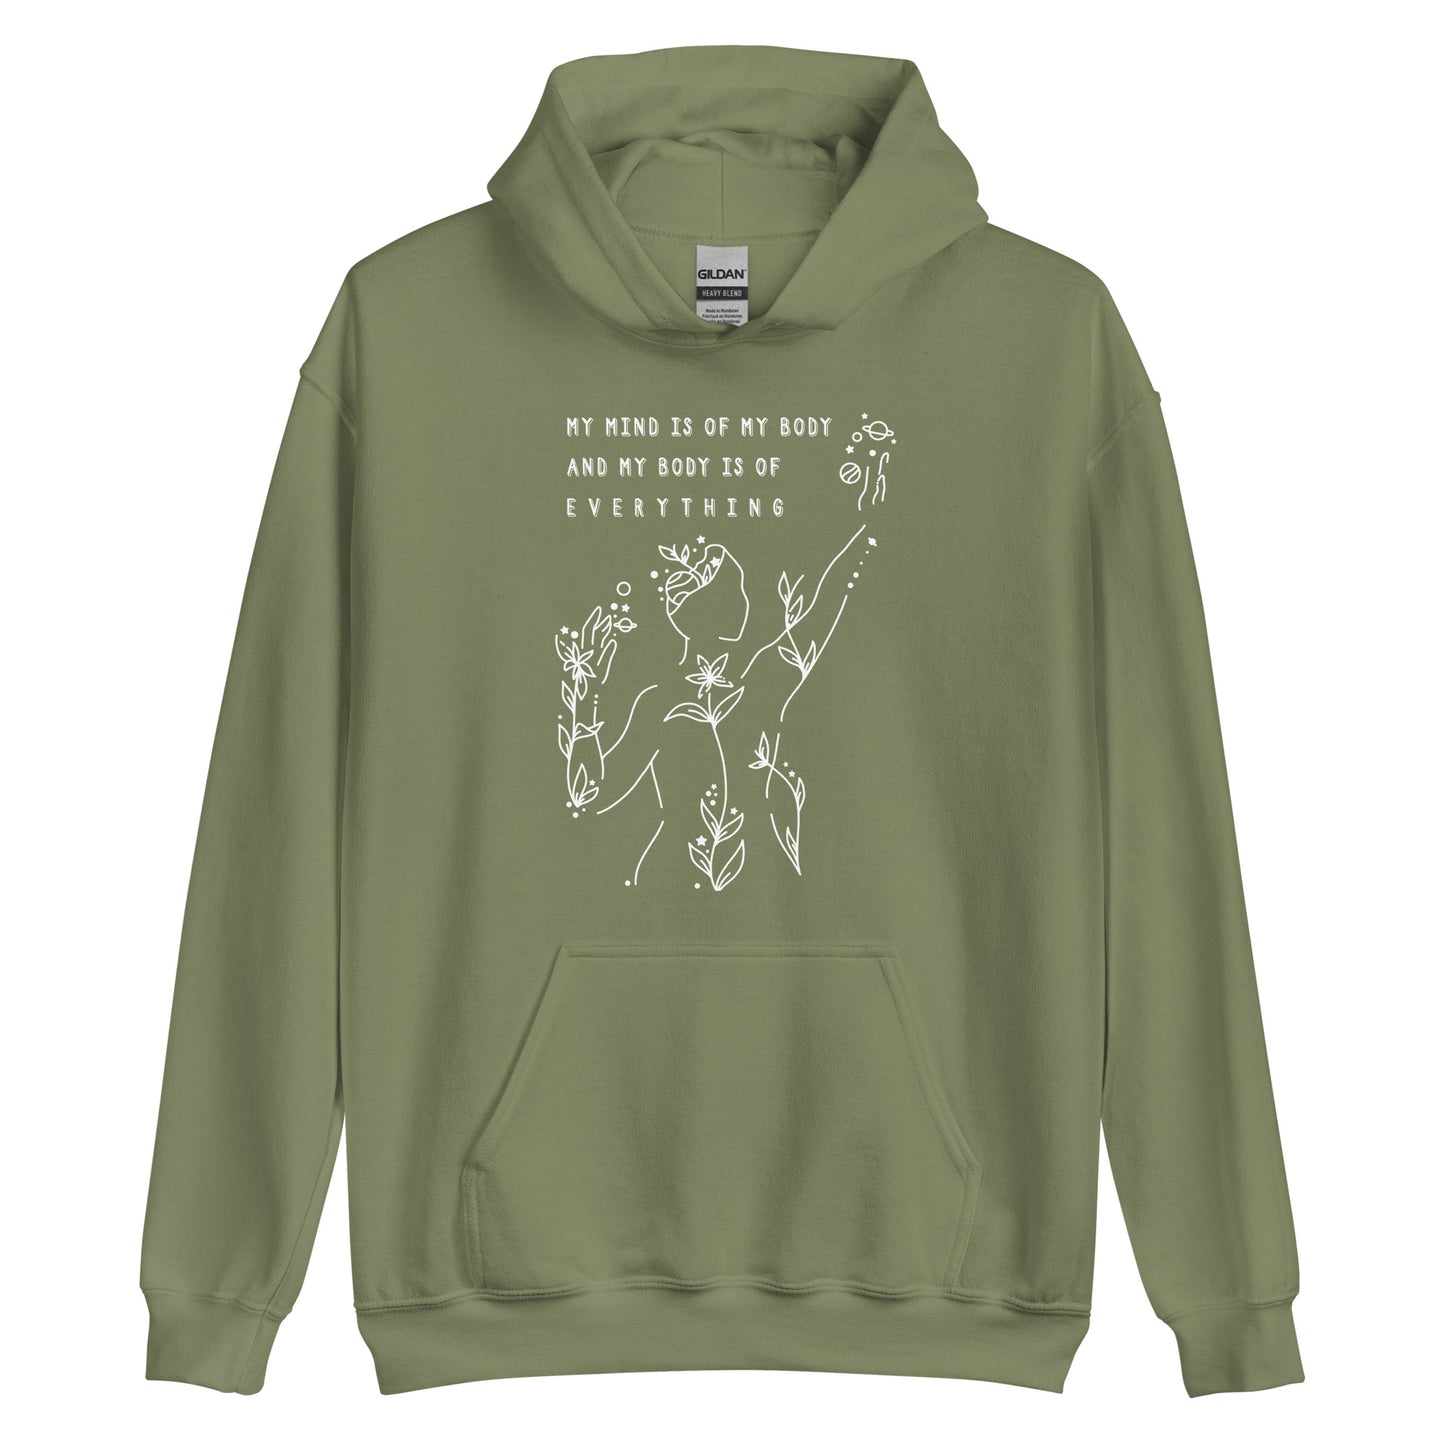 An olive green hooded sweatshirt featuring an abstract illustration of a figure whose body is spreading out into plants and planets and stars. Text above the figure reads "My mind is of my body and my body is of everything."